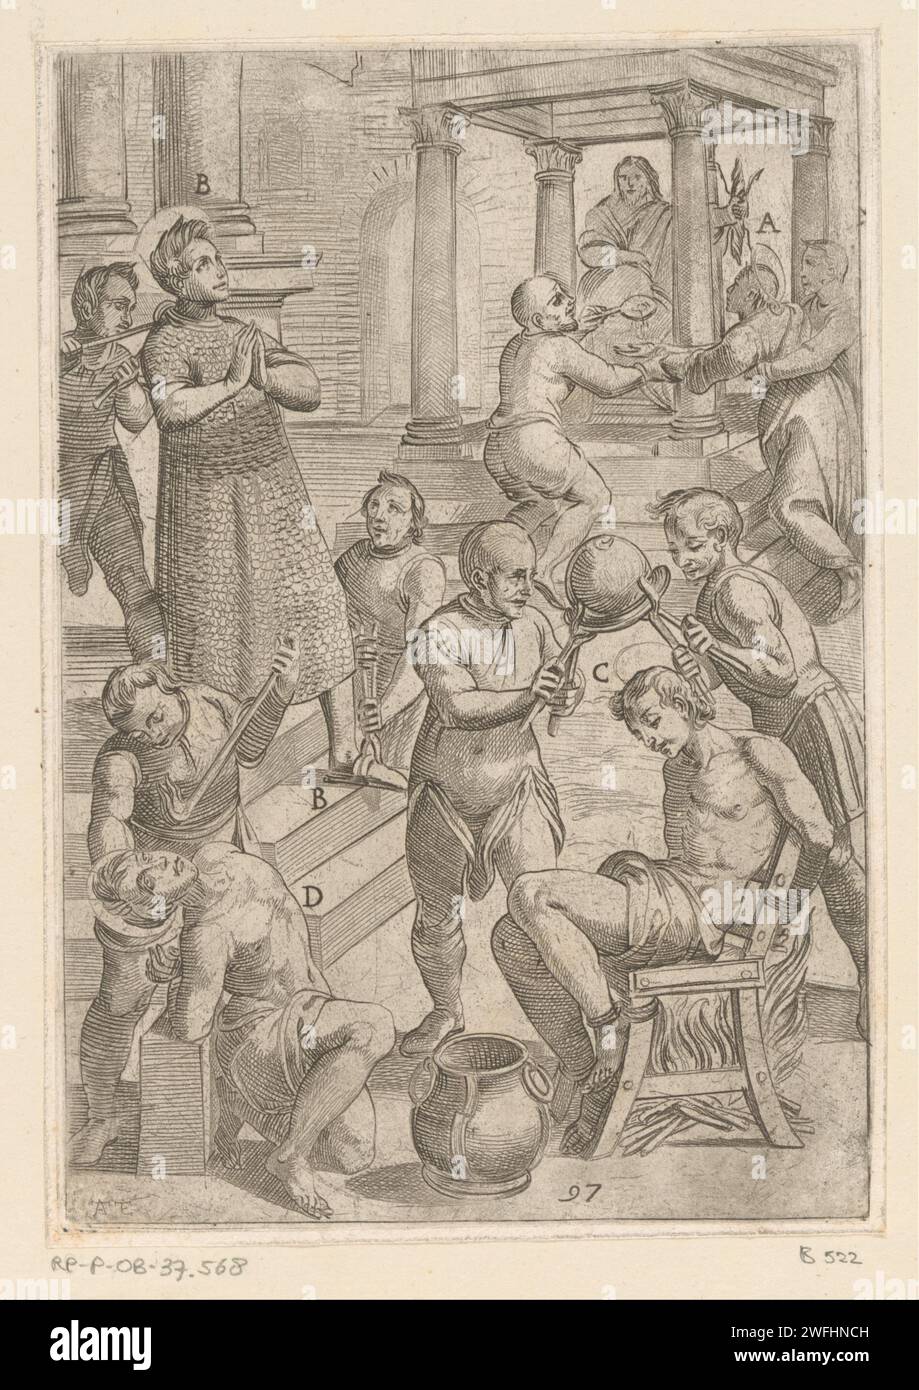 Torture: combustion and strangulation, Antonio Tempesta, 1565 - 1630 print Numbered in the middle: 97. print maker: Italyafter own design by: Italypublisher: RomeVaticaanstad paper etching torture. violent death  maltreatment, torture Stock Photo